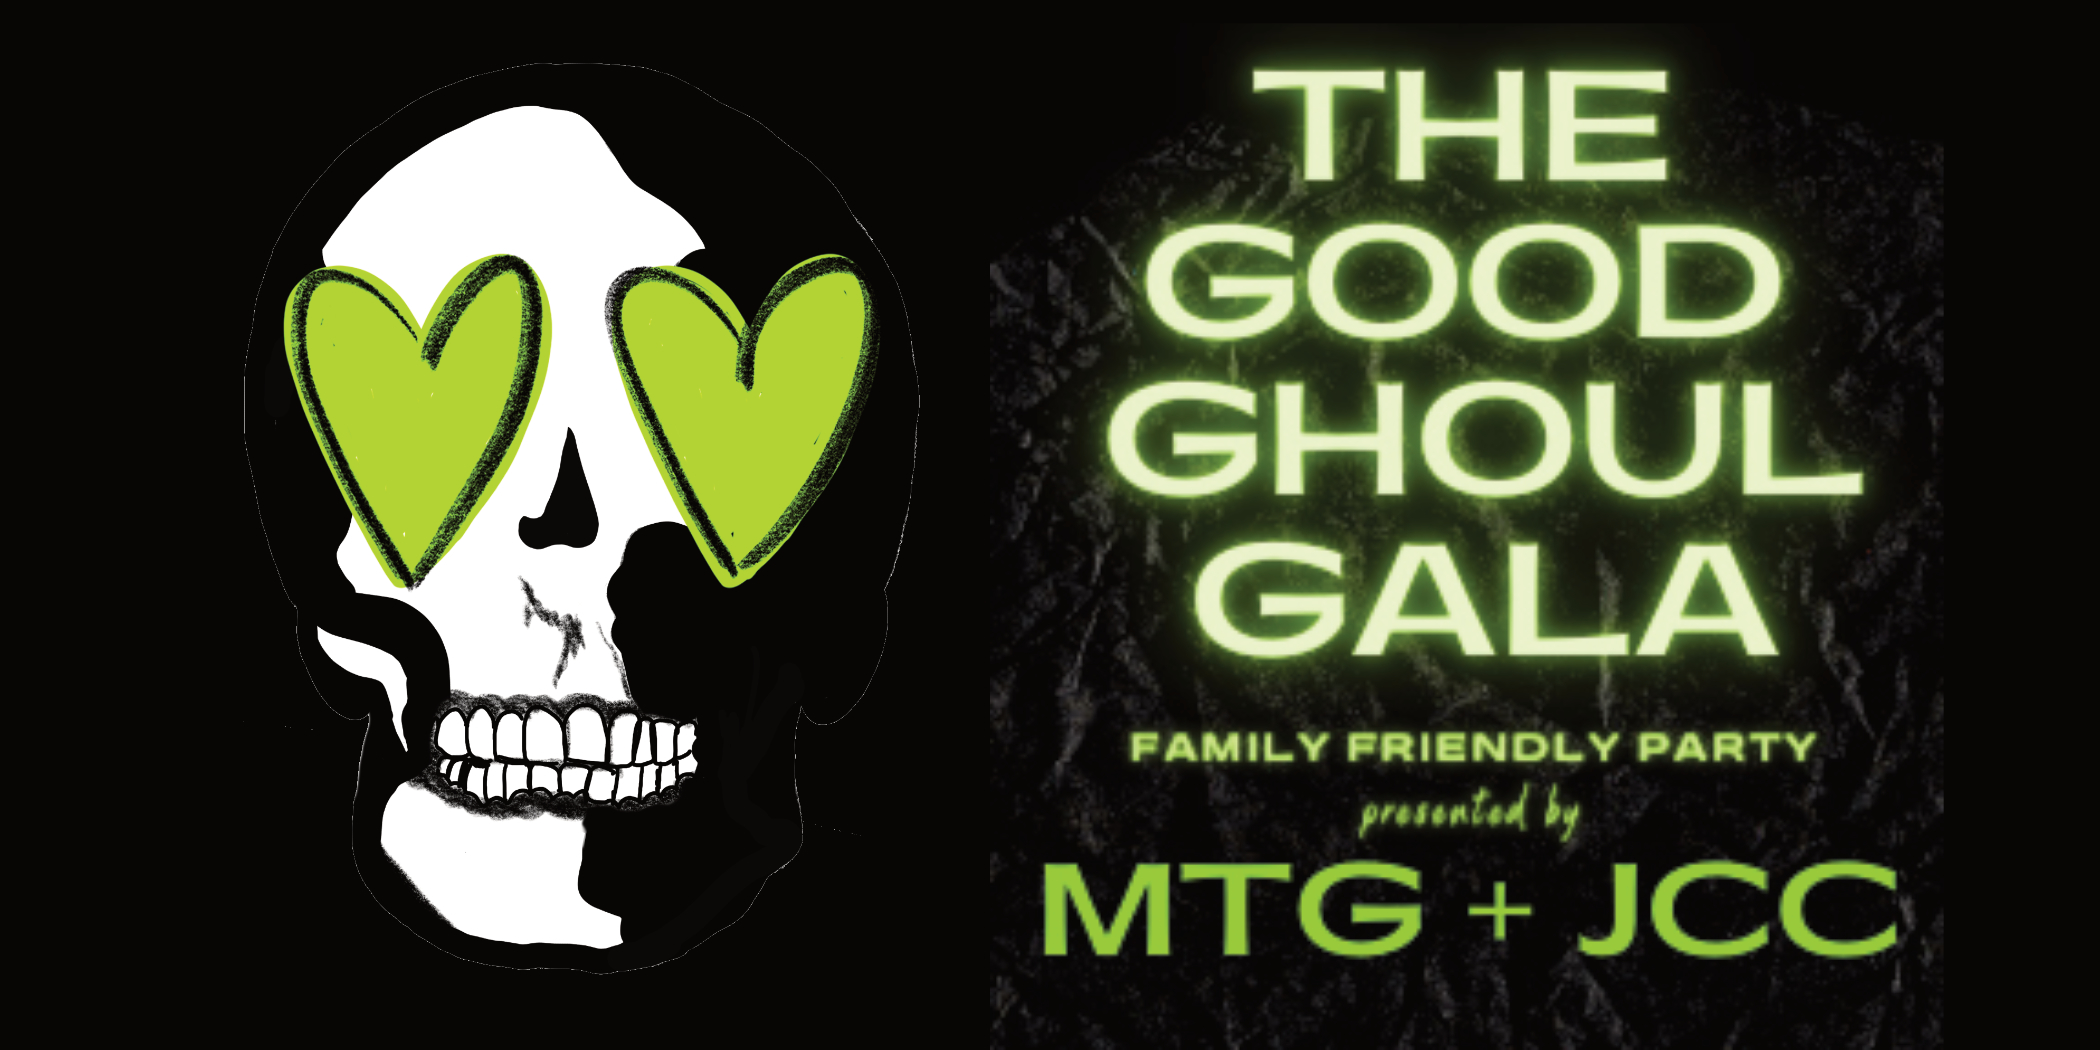 The Good Ghoul Gala event logo